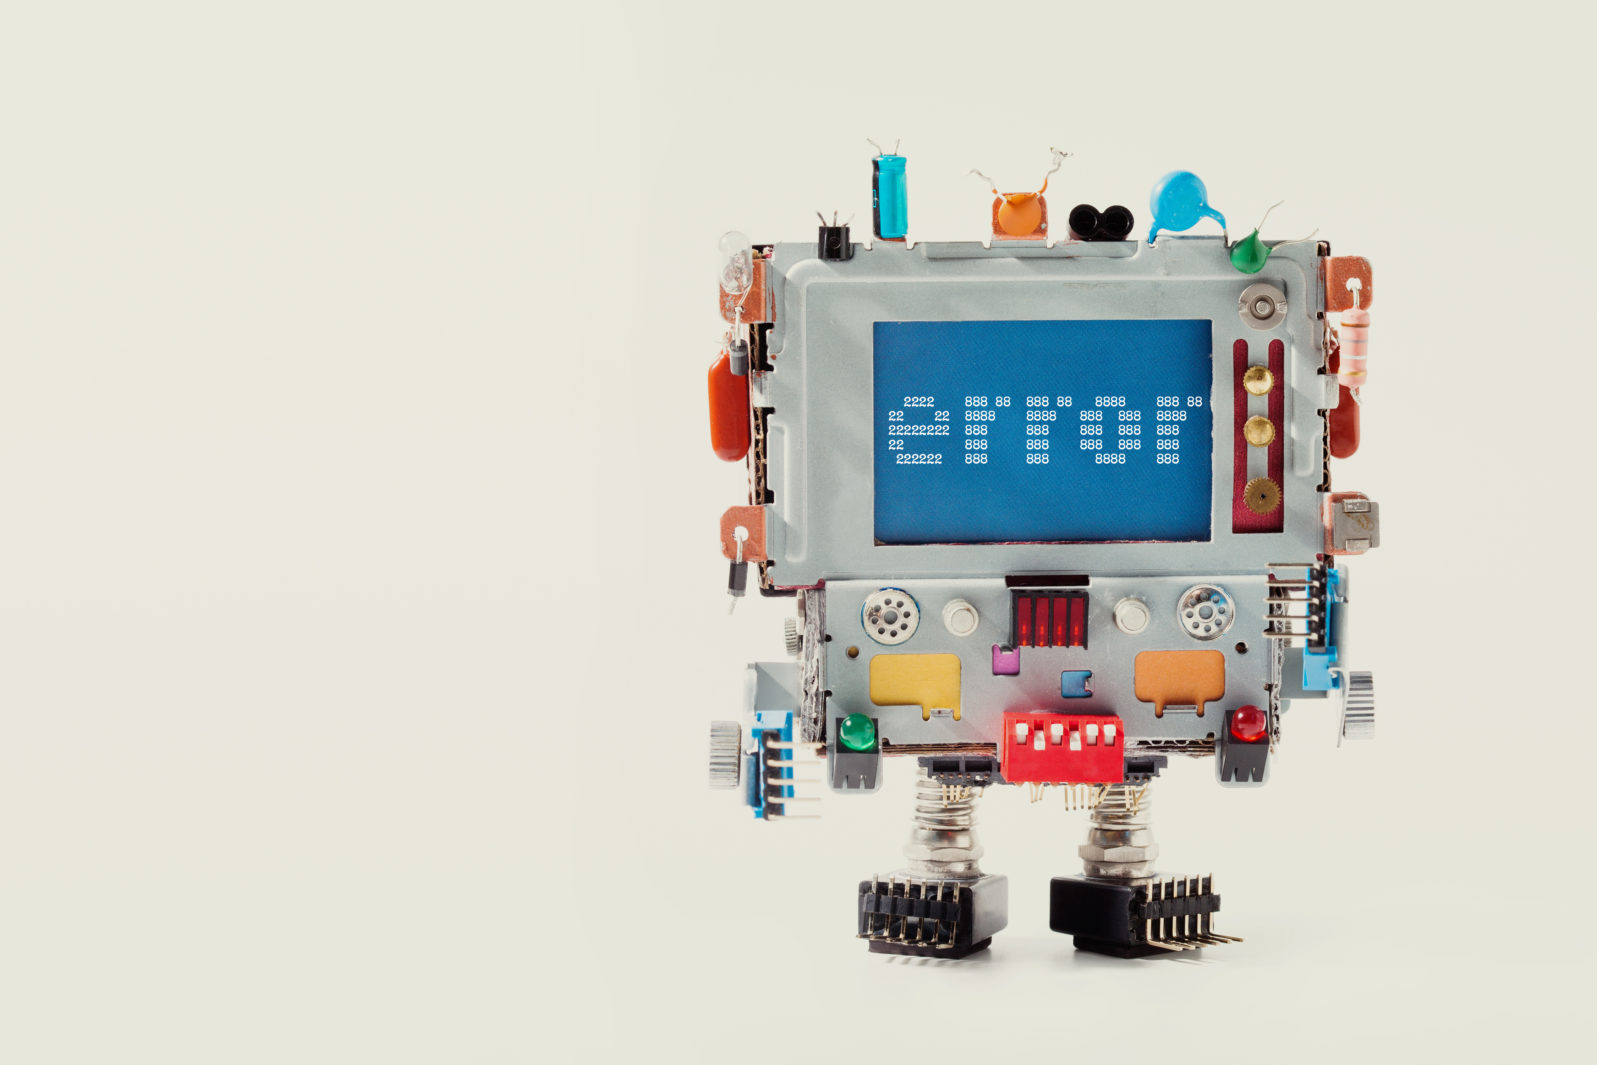 Error page template for website. Retro robot with monitor computer head. Warning message on blue screen. macro view copy space